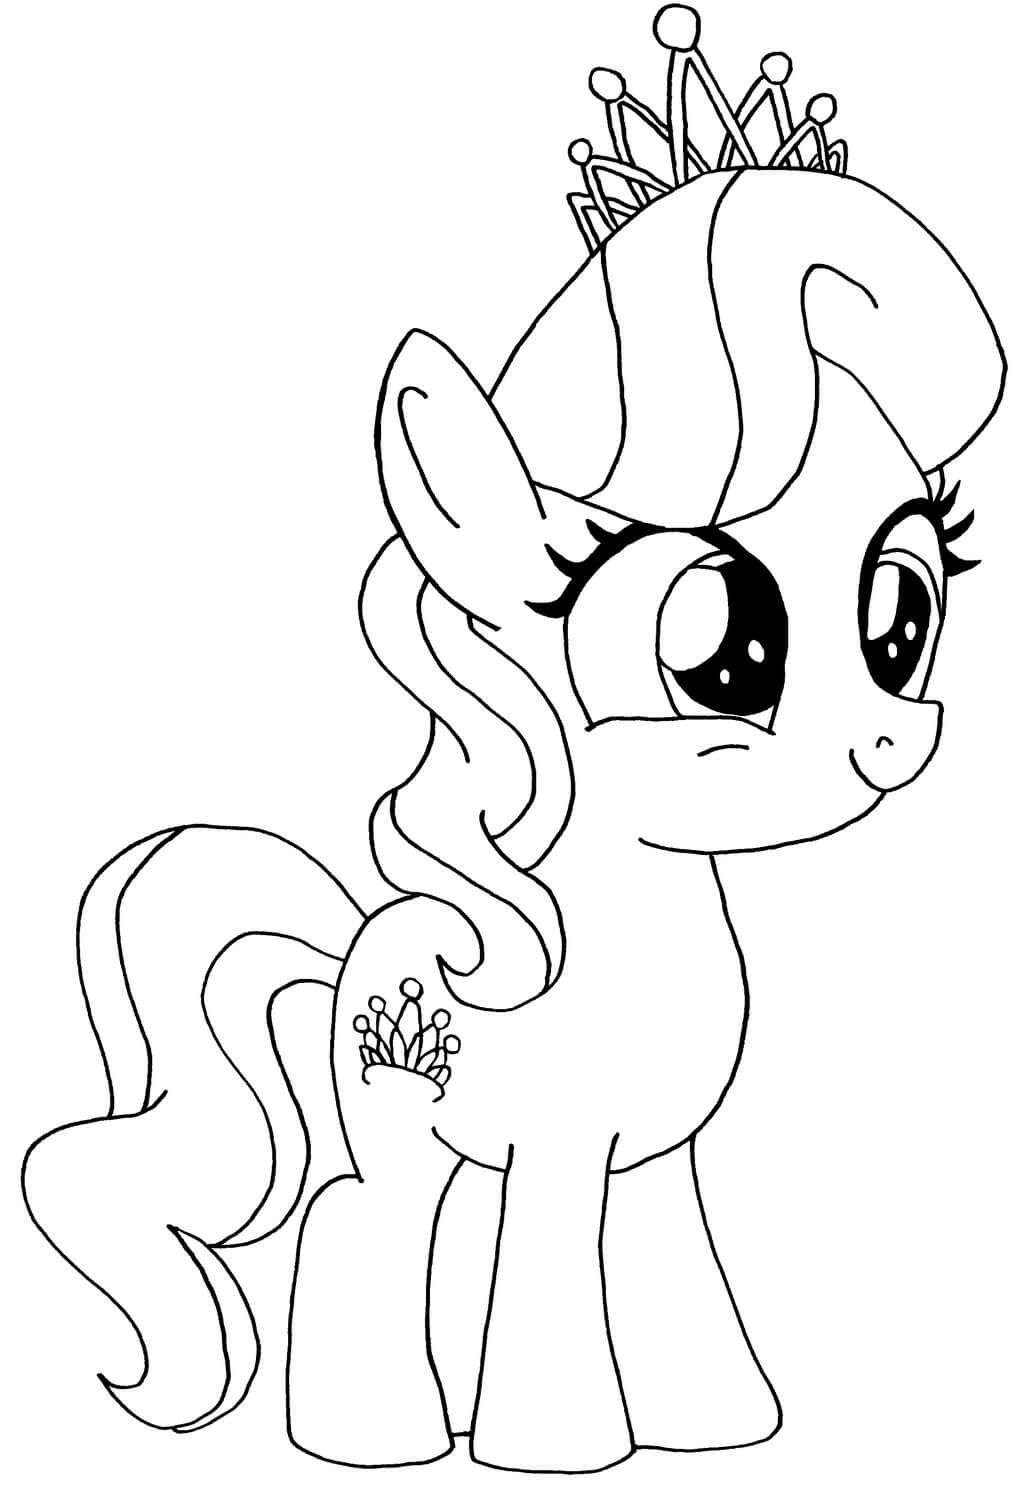 my little pony color sheet 20 my little pony coloring pages your kid will love neat sheet color pony little my 